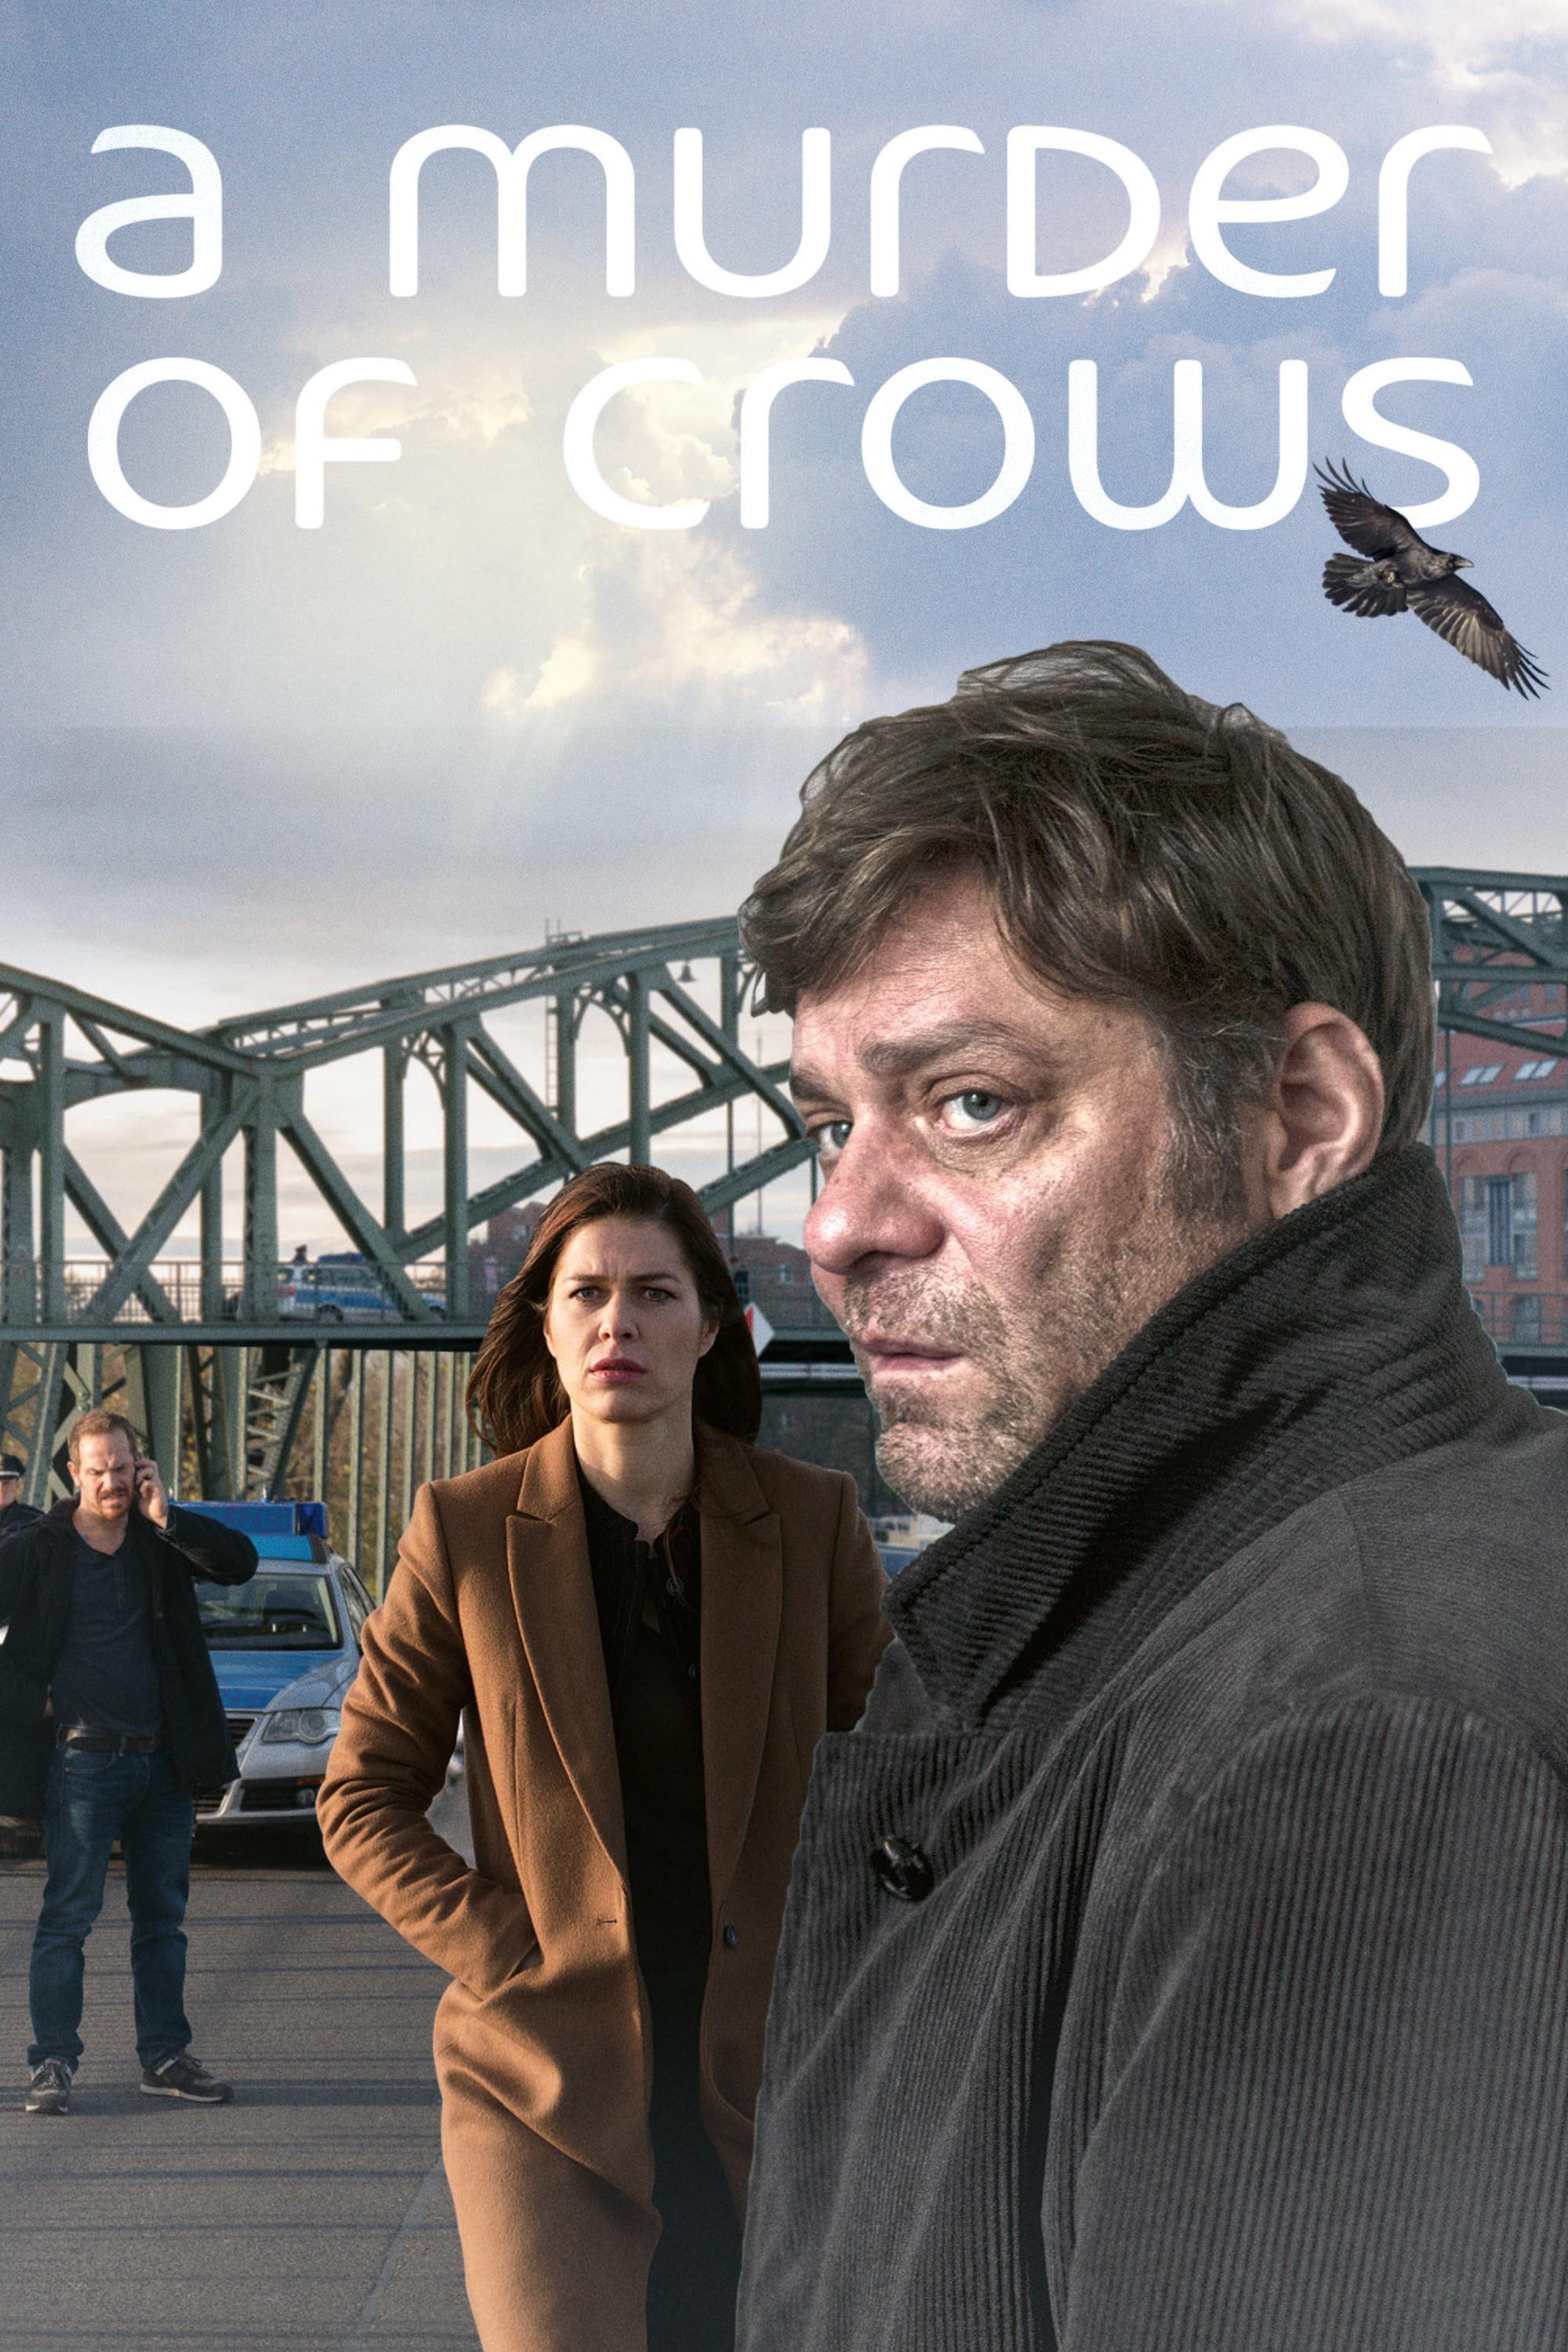 A Murder of Crows show's poster